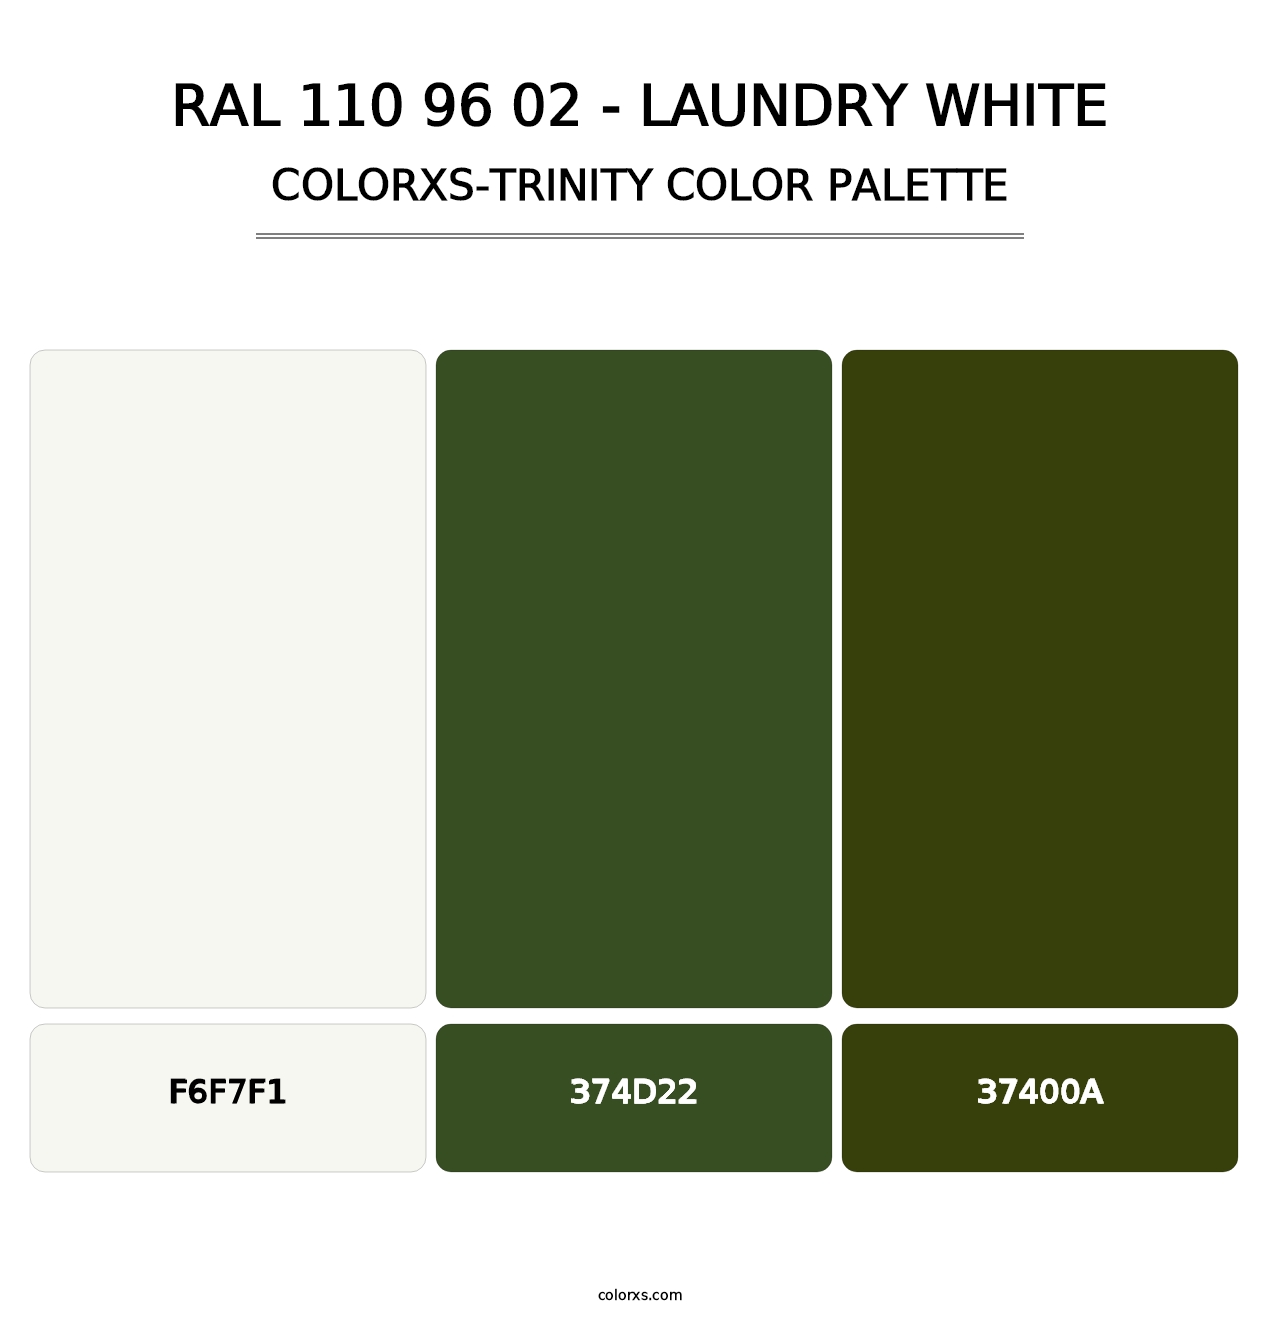 RAL 110 96 02 - Laundry White - Colorxs Trinity Palette